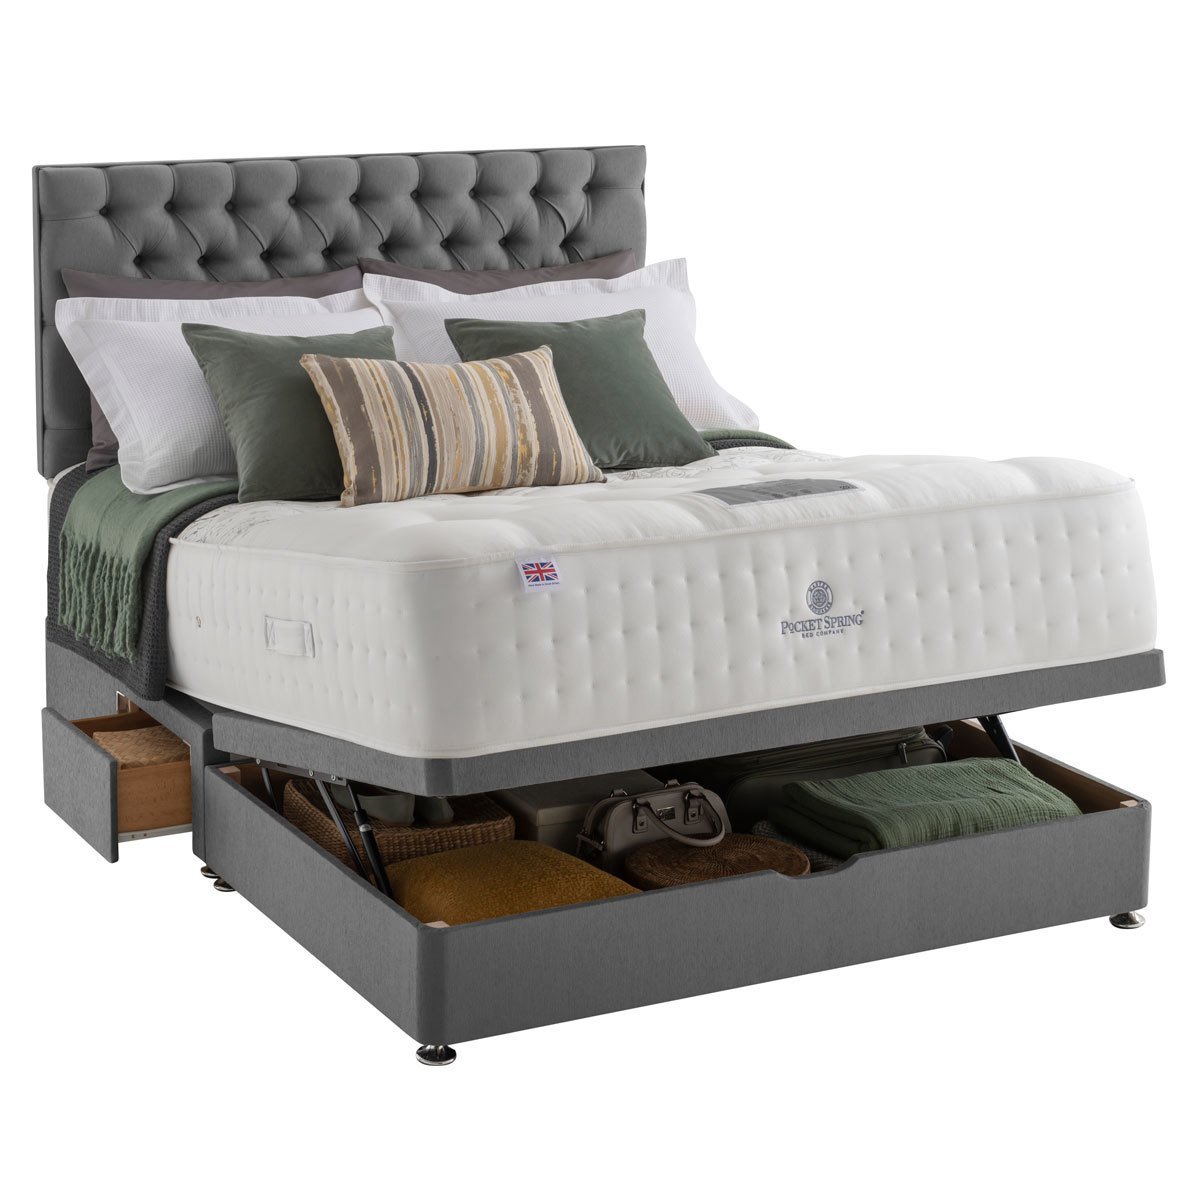 Pocket Spring Bed Company Mulberry Mattress & Grey Ottoman Divan in 3 Sizes - Signature Retail Stores